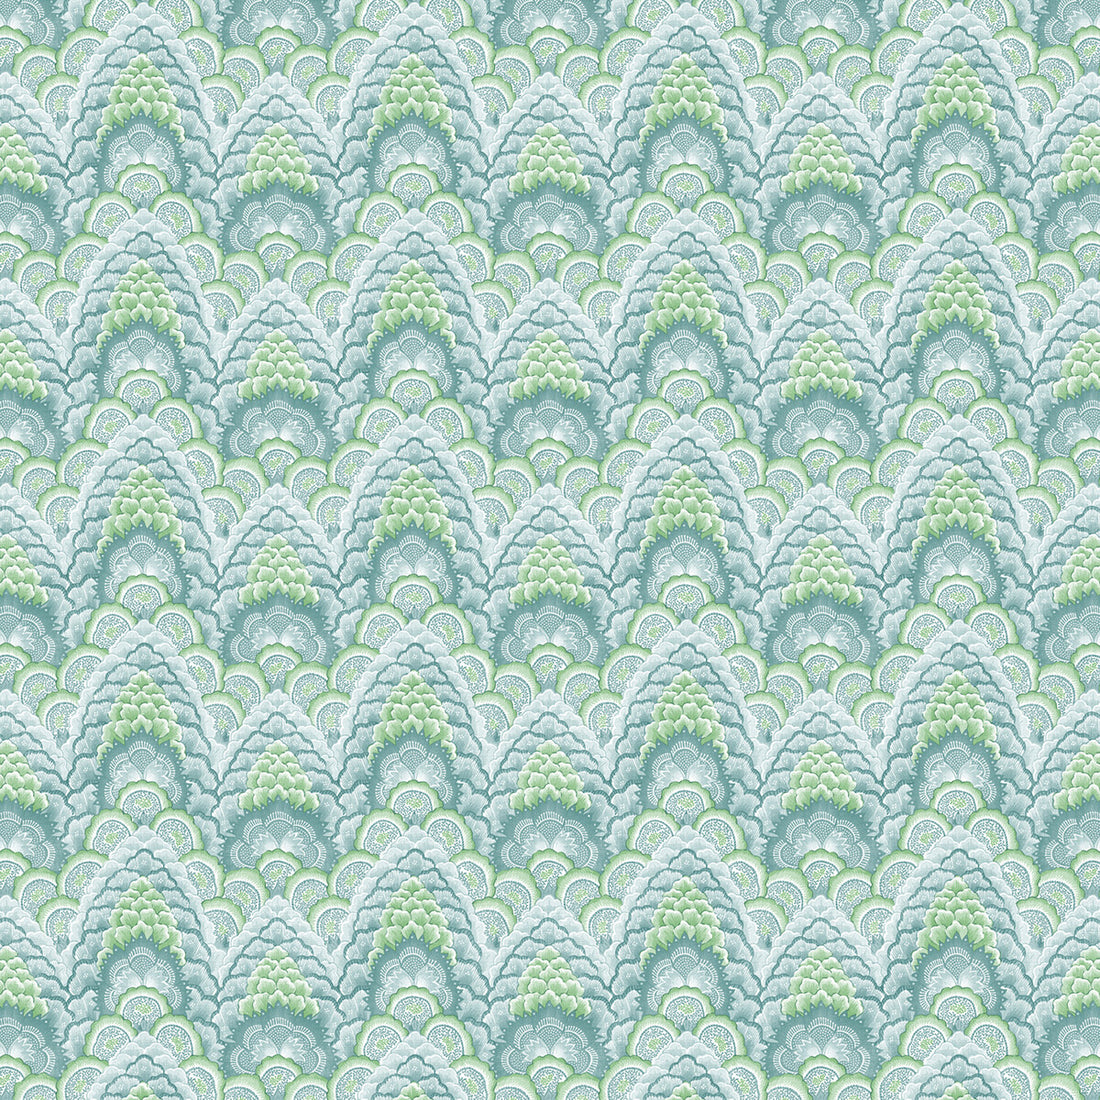 Ganges fabric in verde color - pattern GDT5543.002.0 - by Gaston y Daniela in the Gaston Libreria collection